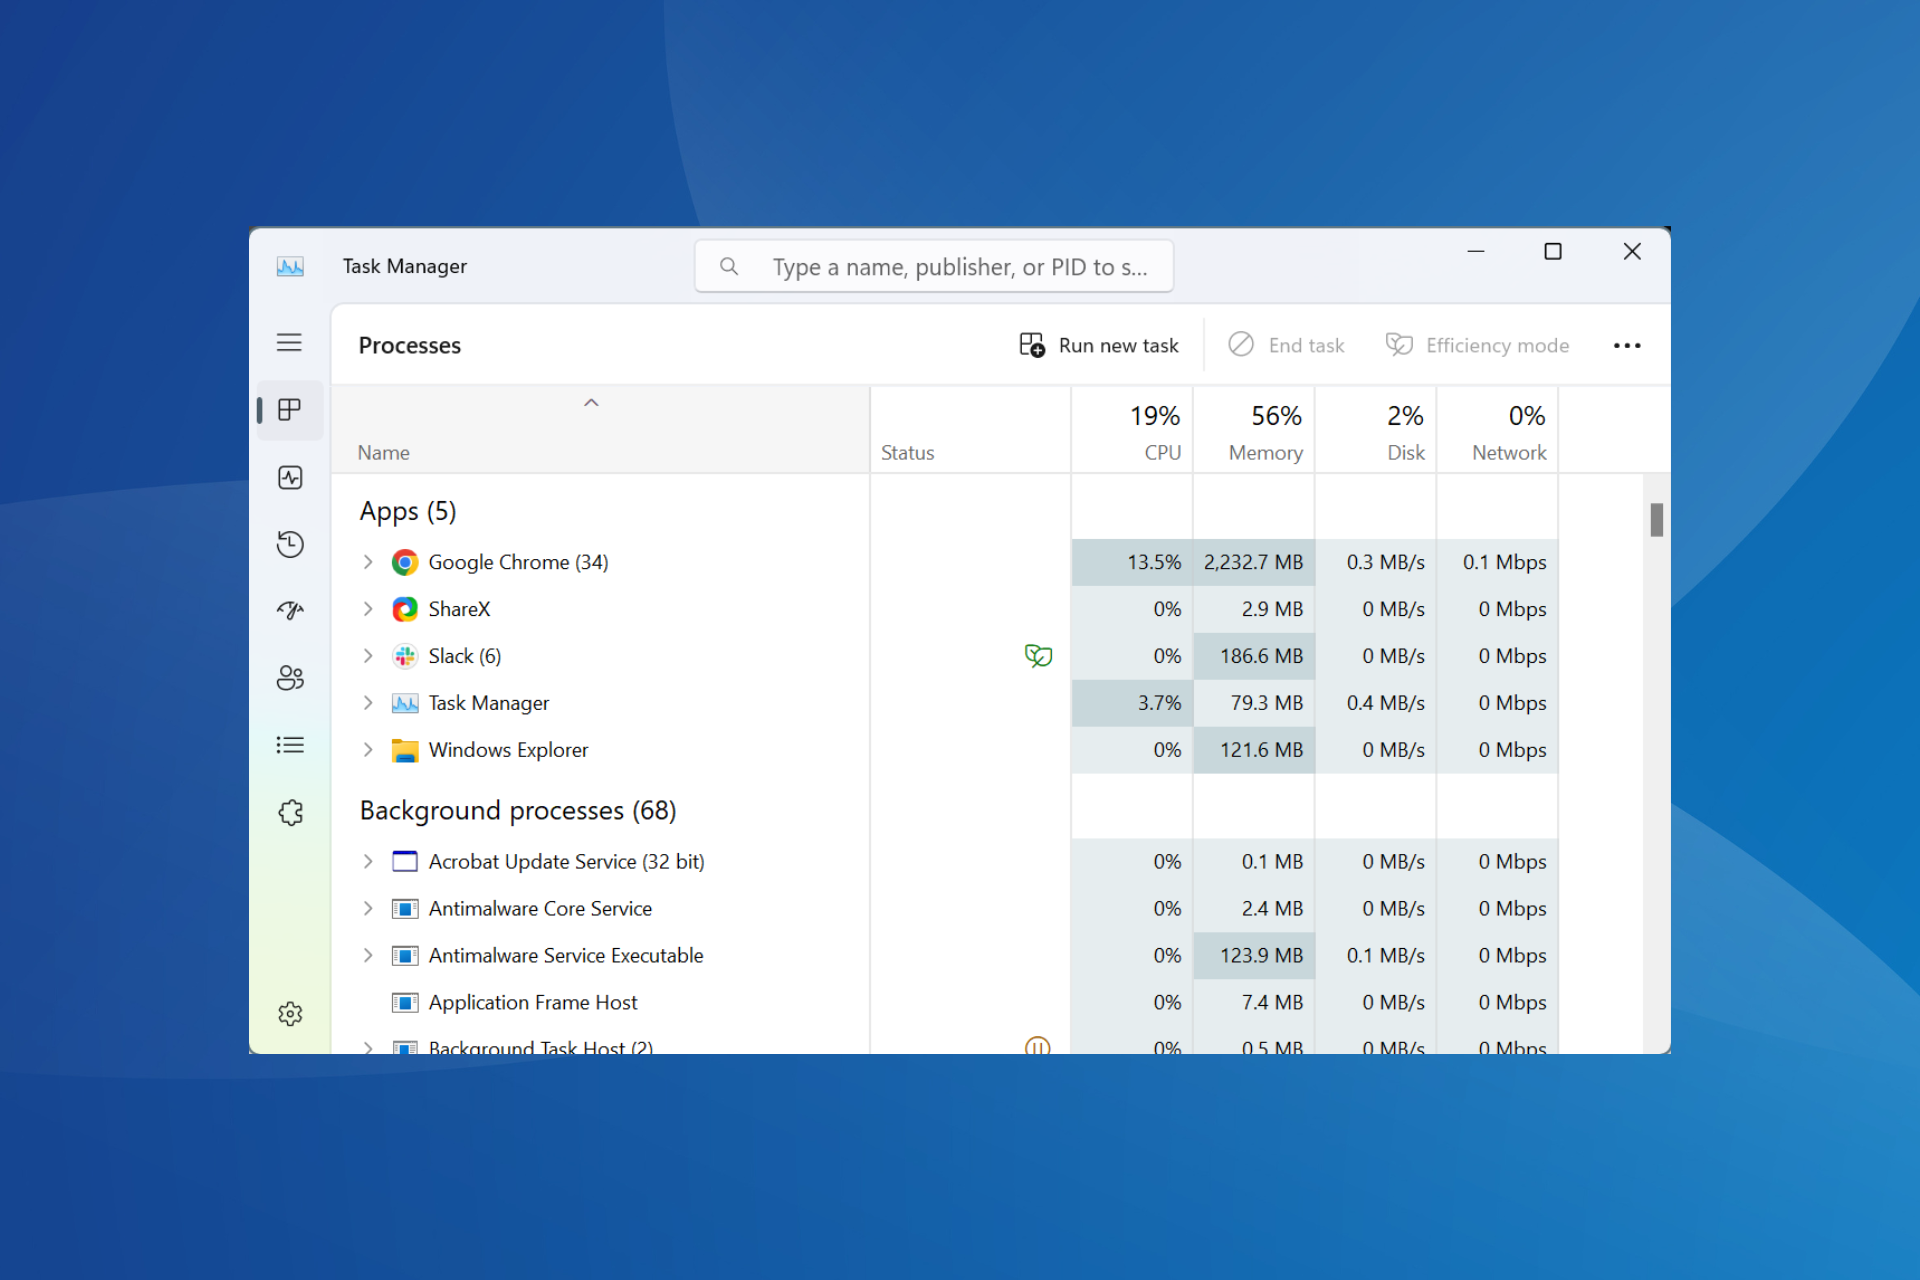 Task manager is getting consistently slower, and people are fuming about it